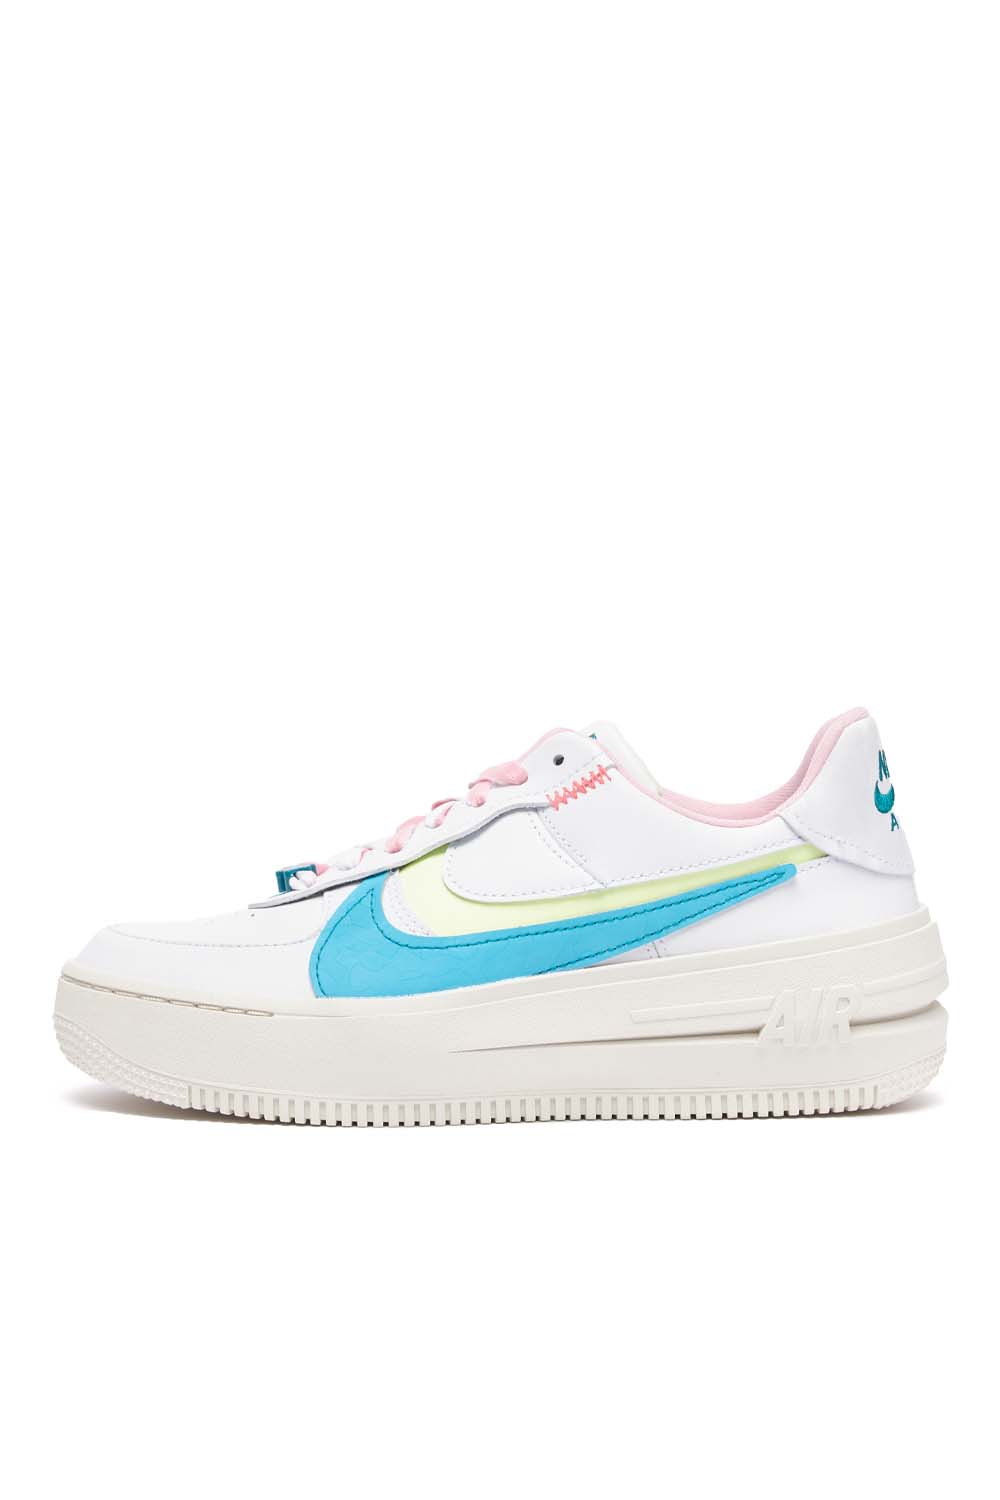 Nike Women's Air Force 1 PLT.AF.ORM Shoes, Size 7.5, White/White/White